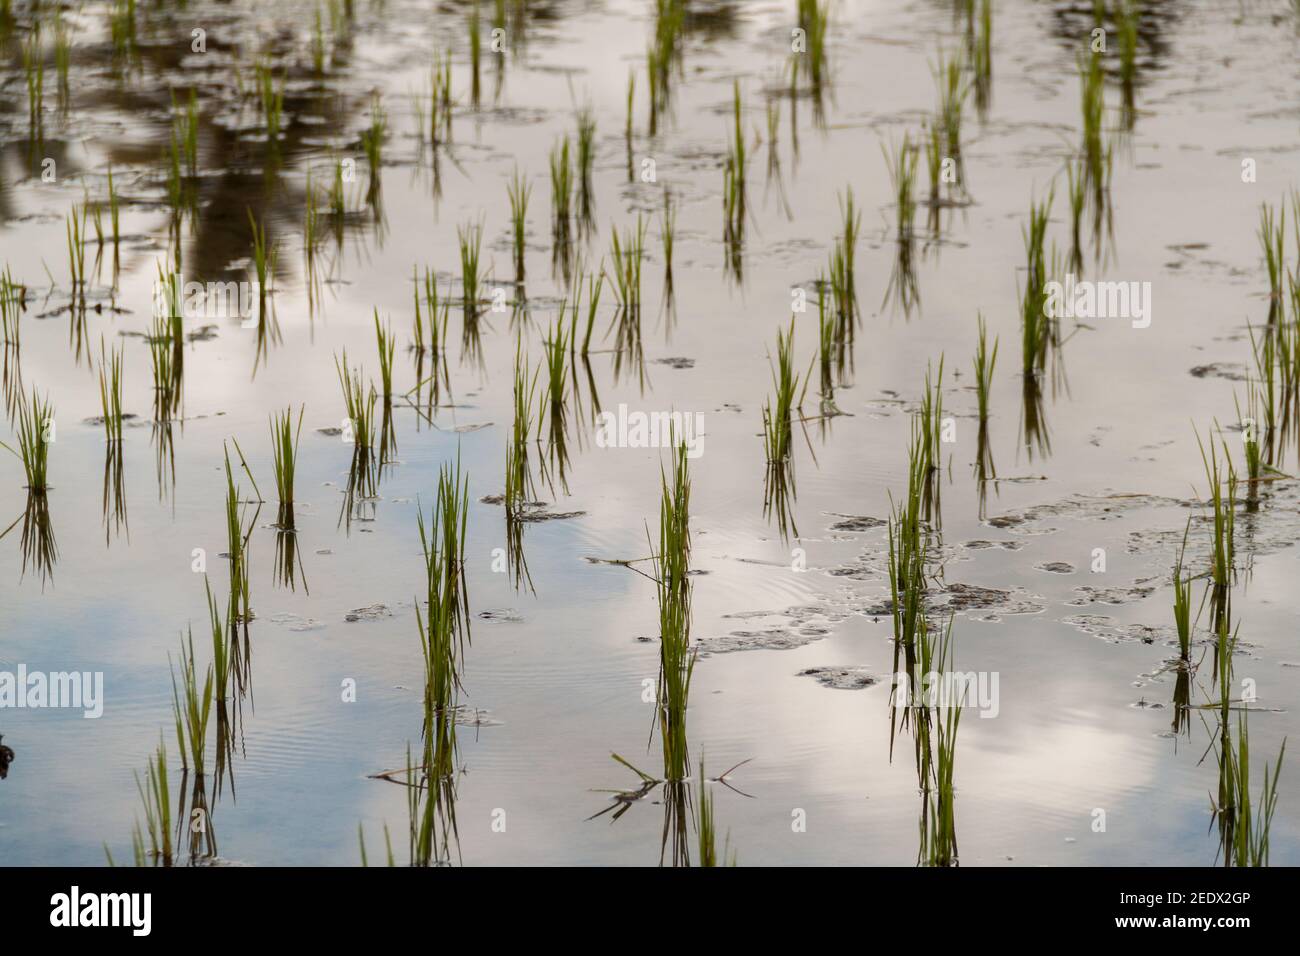 A close-up image of rice plants in water with the reflection of the blue sky at Tegallalang Rice Terrace in Bali where the traditional subak irrigatio Stock Photo